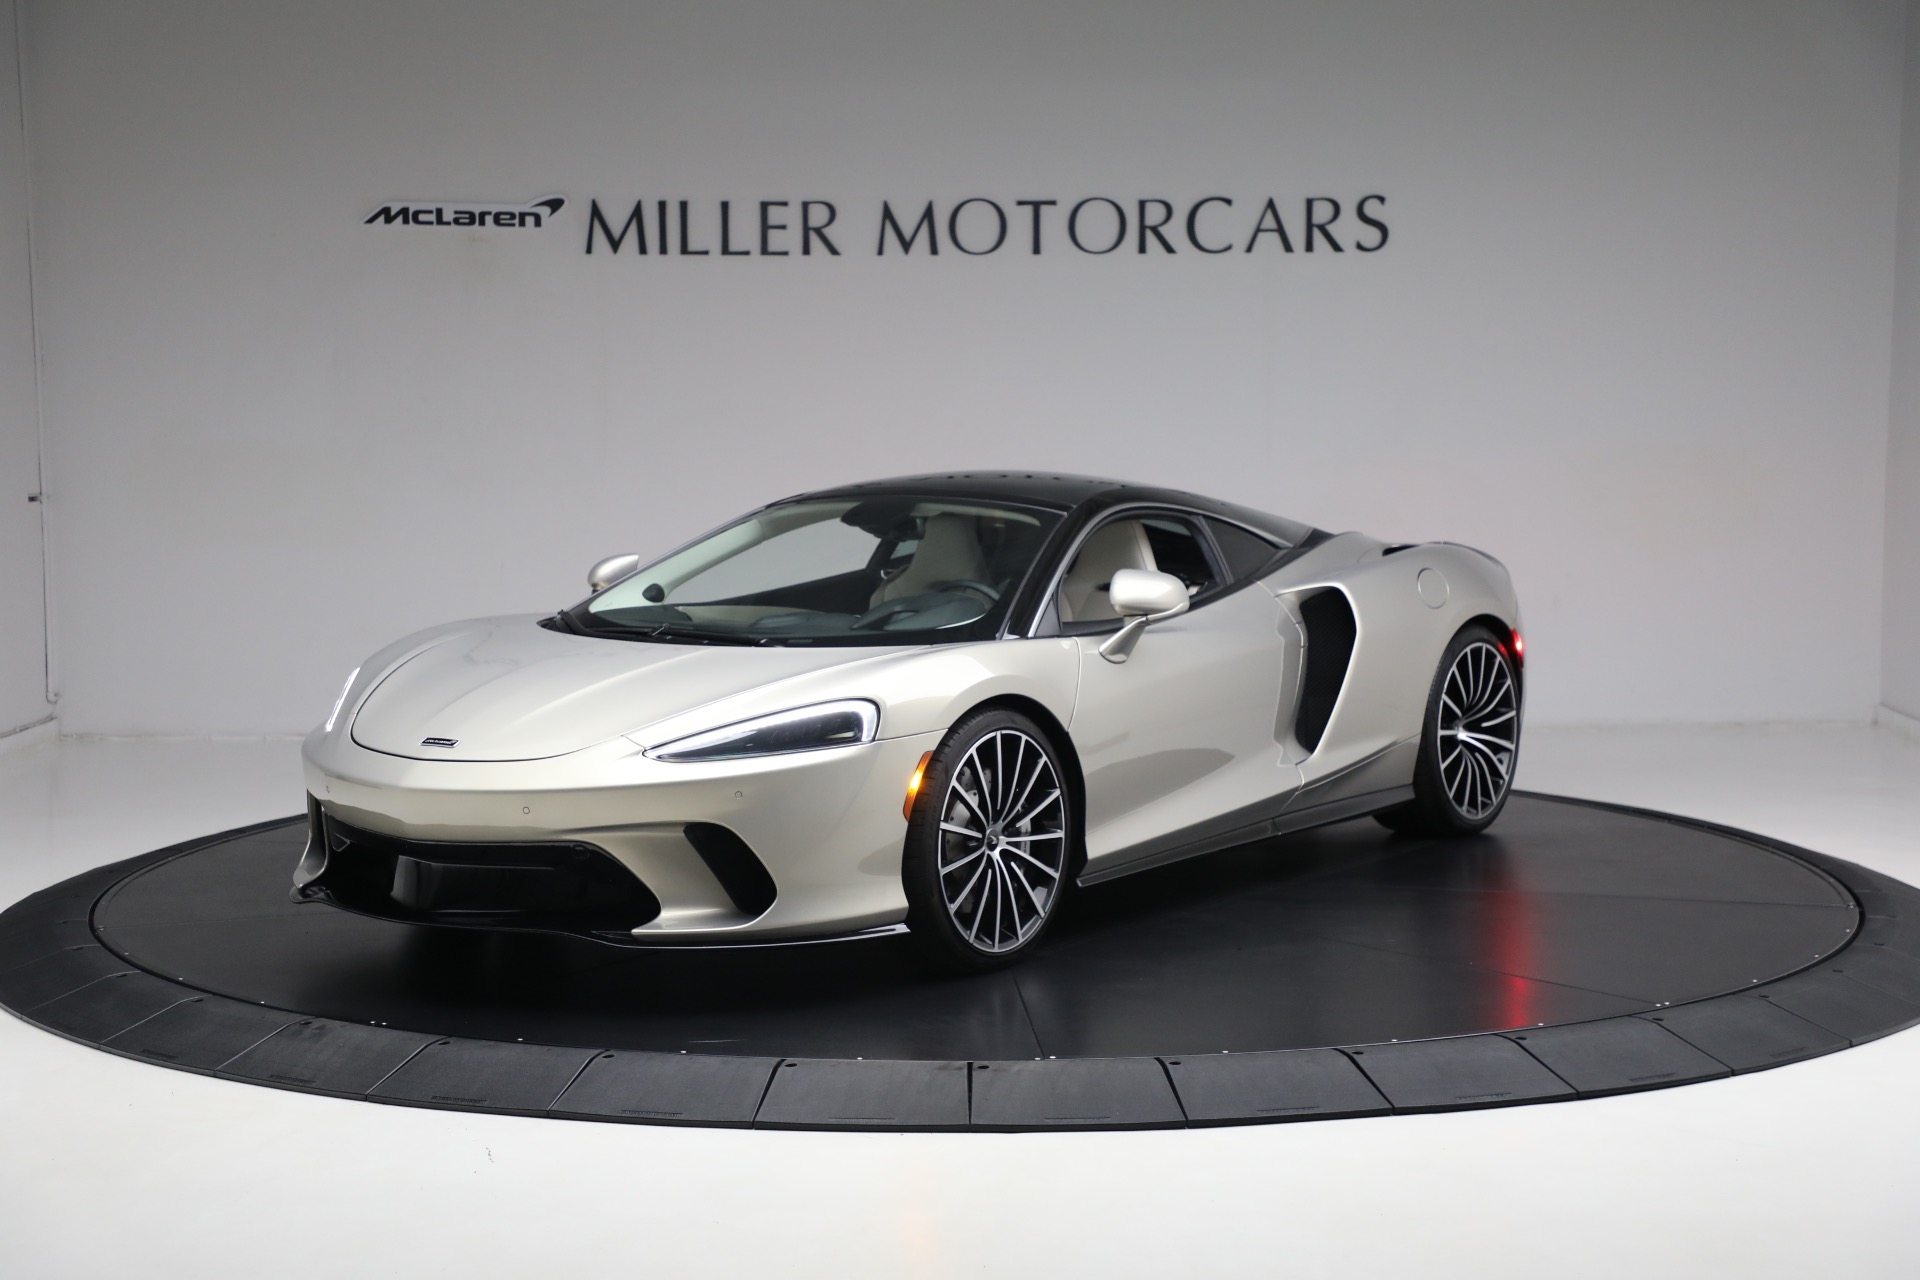 Used 2020 McLaren GT Luxe for sale $169,900 at Aston Martin of Greenwich in Greenwich CT 06830 1